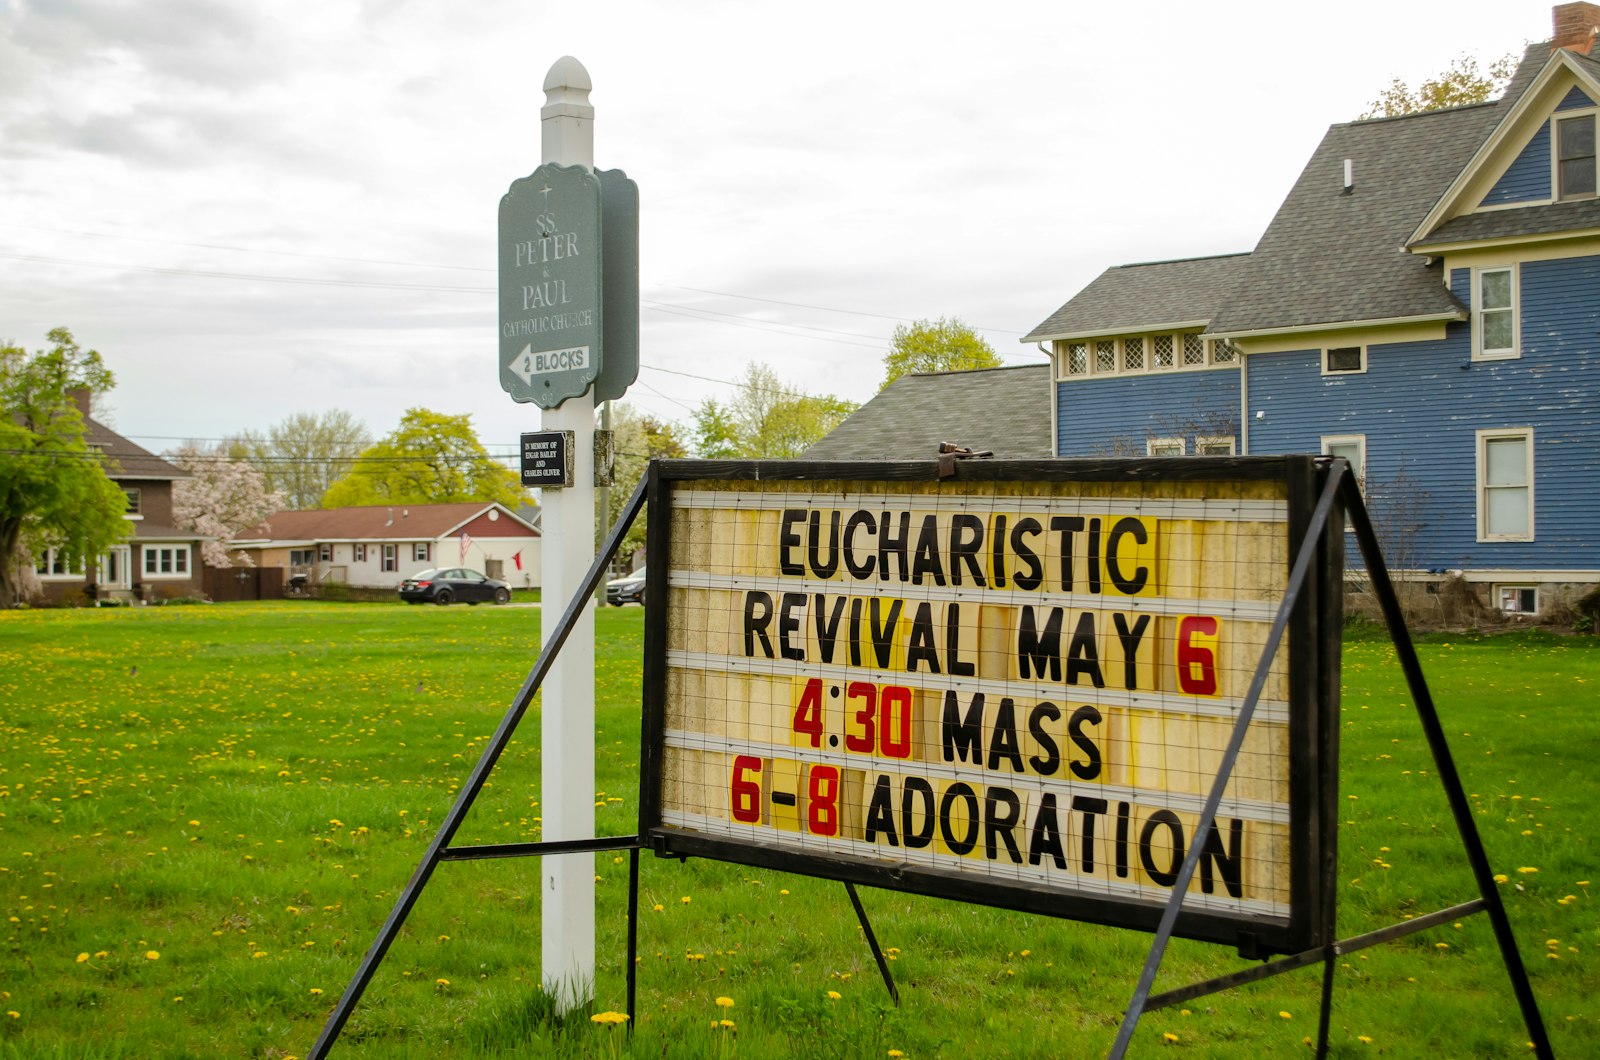 A sign outside SS. Peter and Paul Parish in North Branch announces the Eucharistic Revival taking place May 6. The revival, part of the U.S. Conference of Catholic Bishops' three-year effort, aims to bolster faith in the Real Presence of Jesus in the Eucharist. (Photos by Matthew Rich | Special to Detroit Catholic)